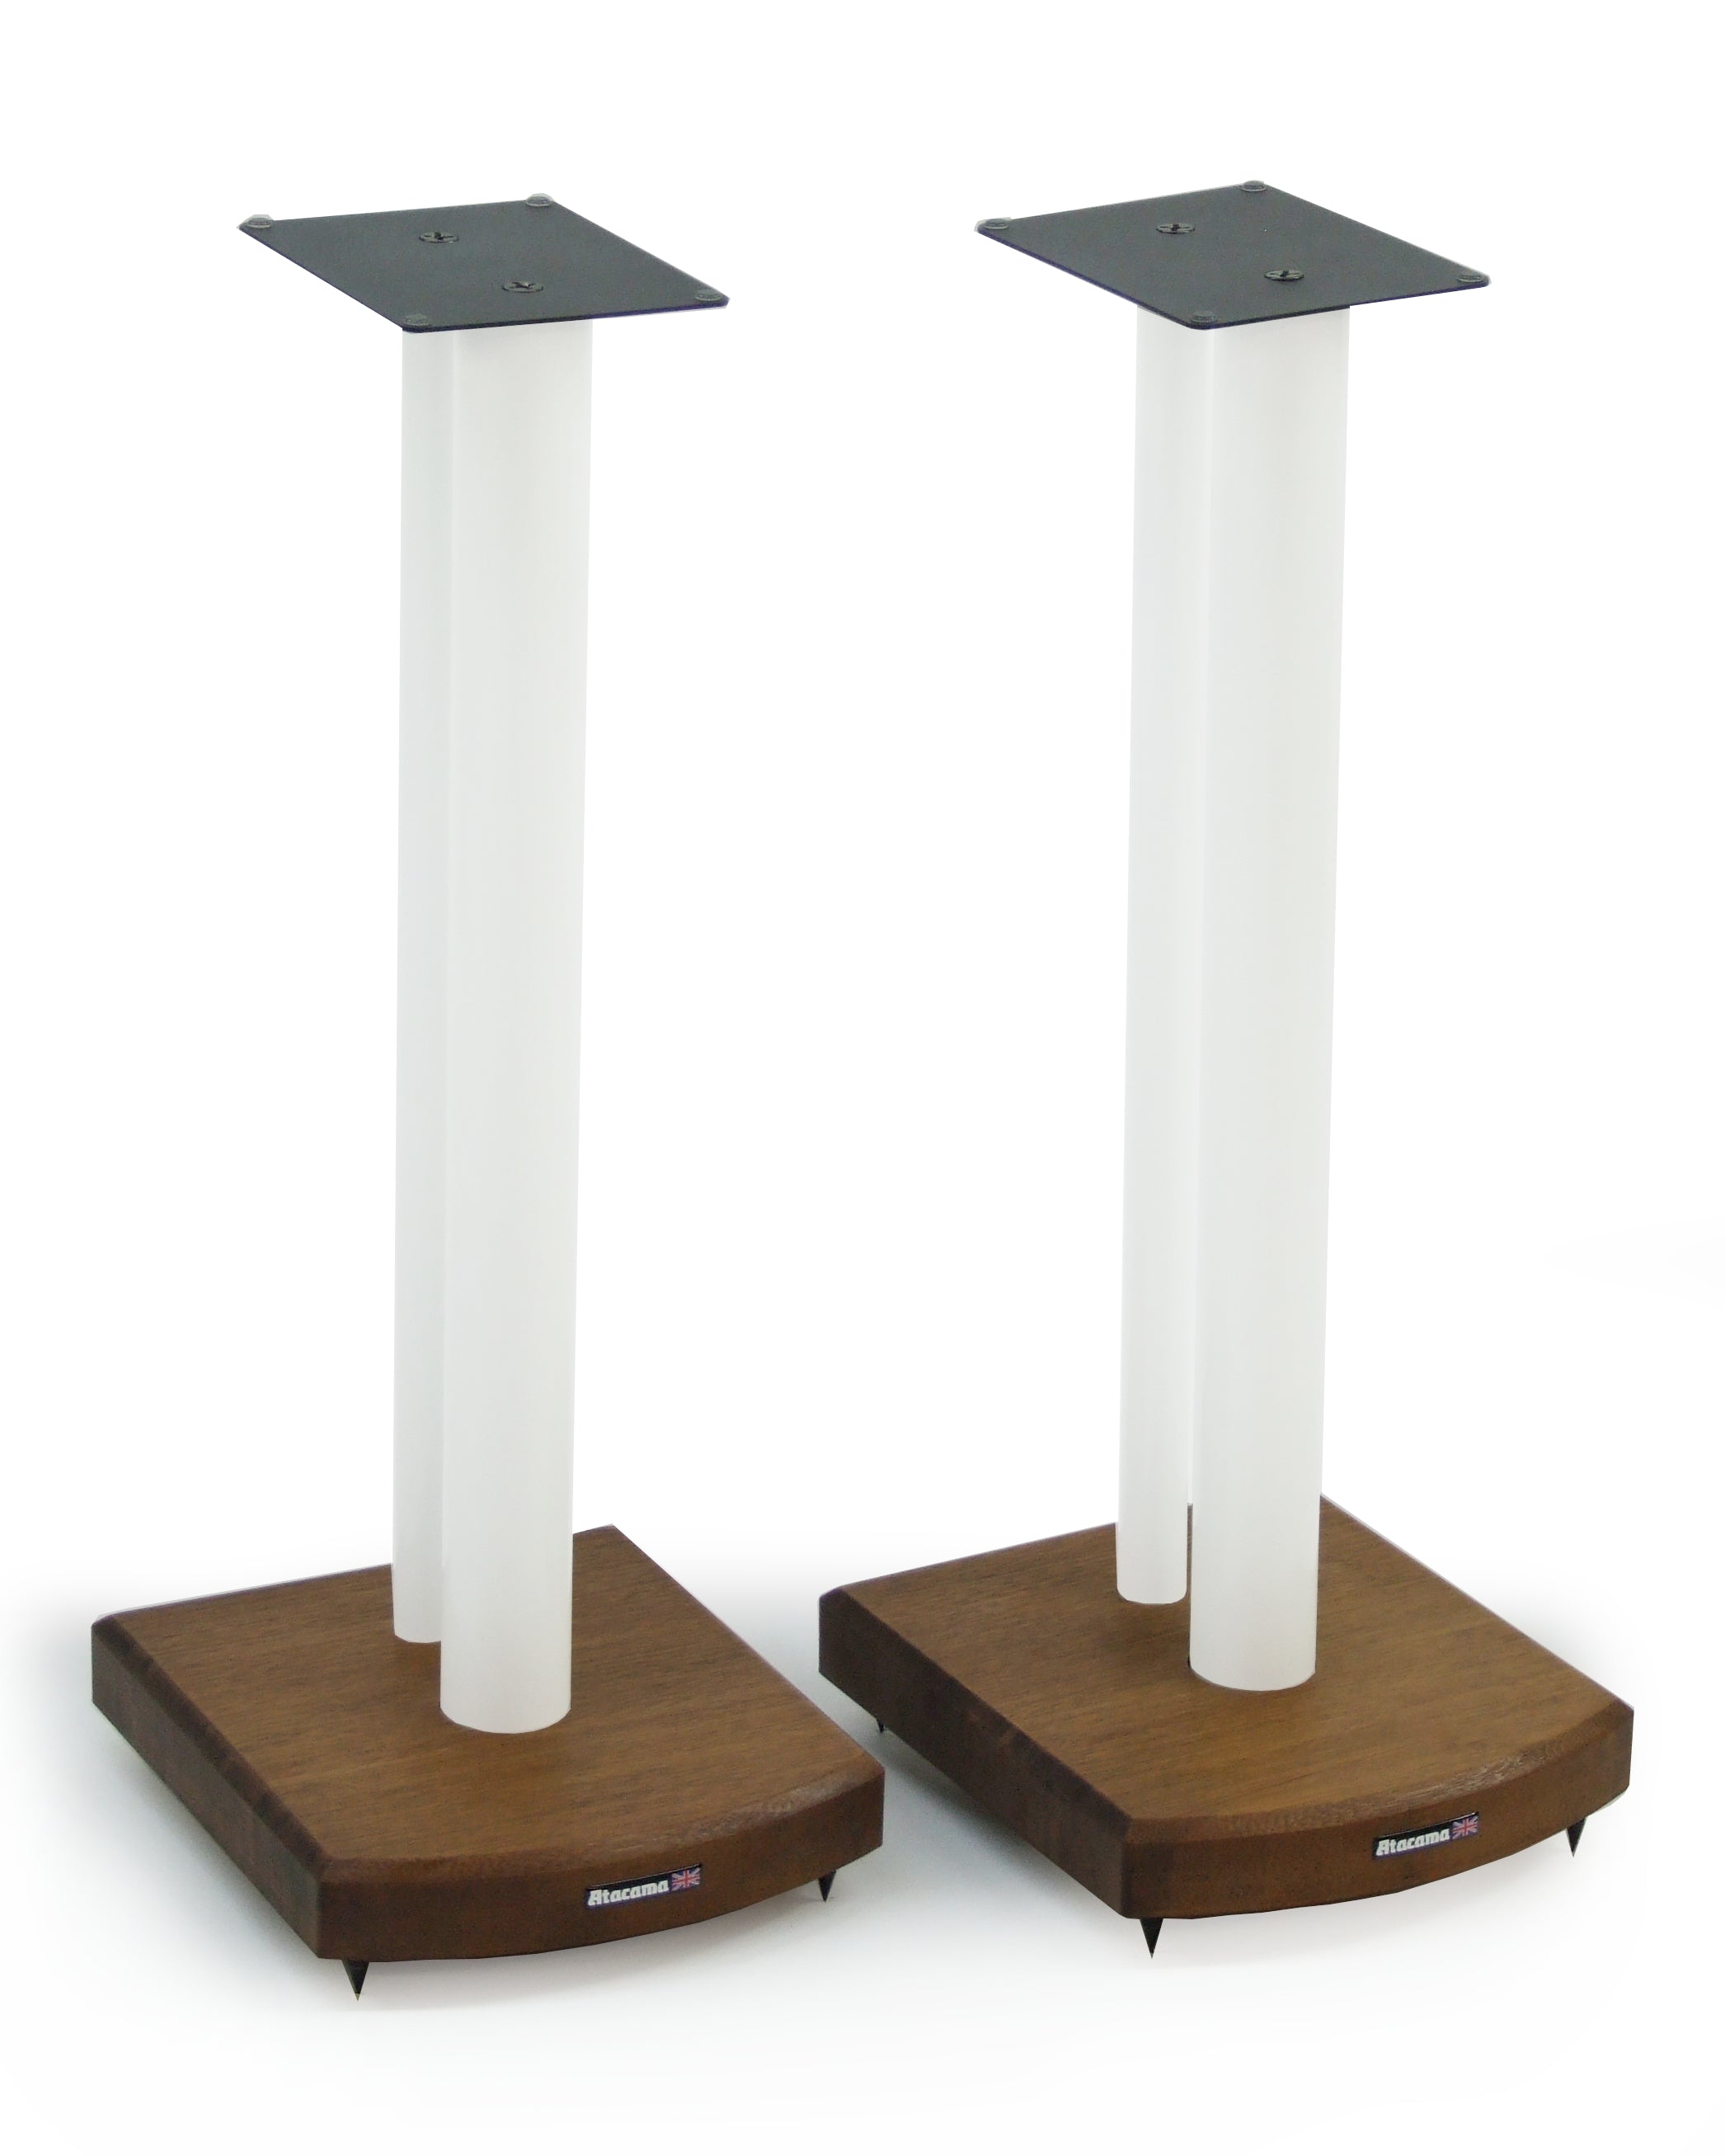 MOSECO 6 speaker stands (Pair)